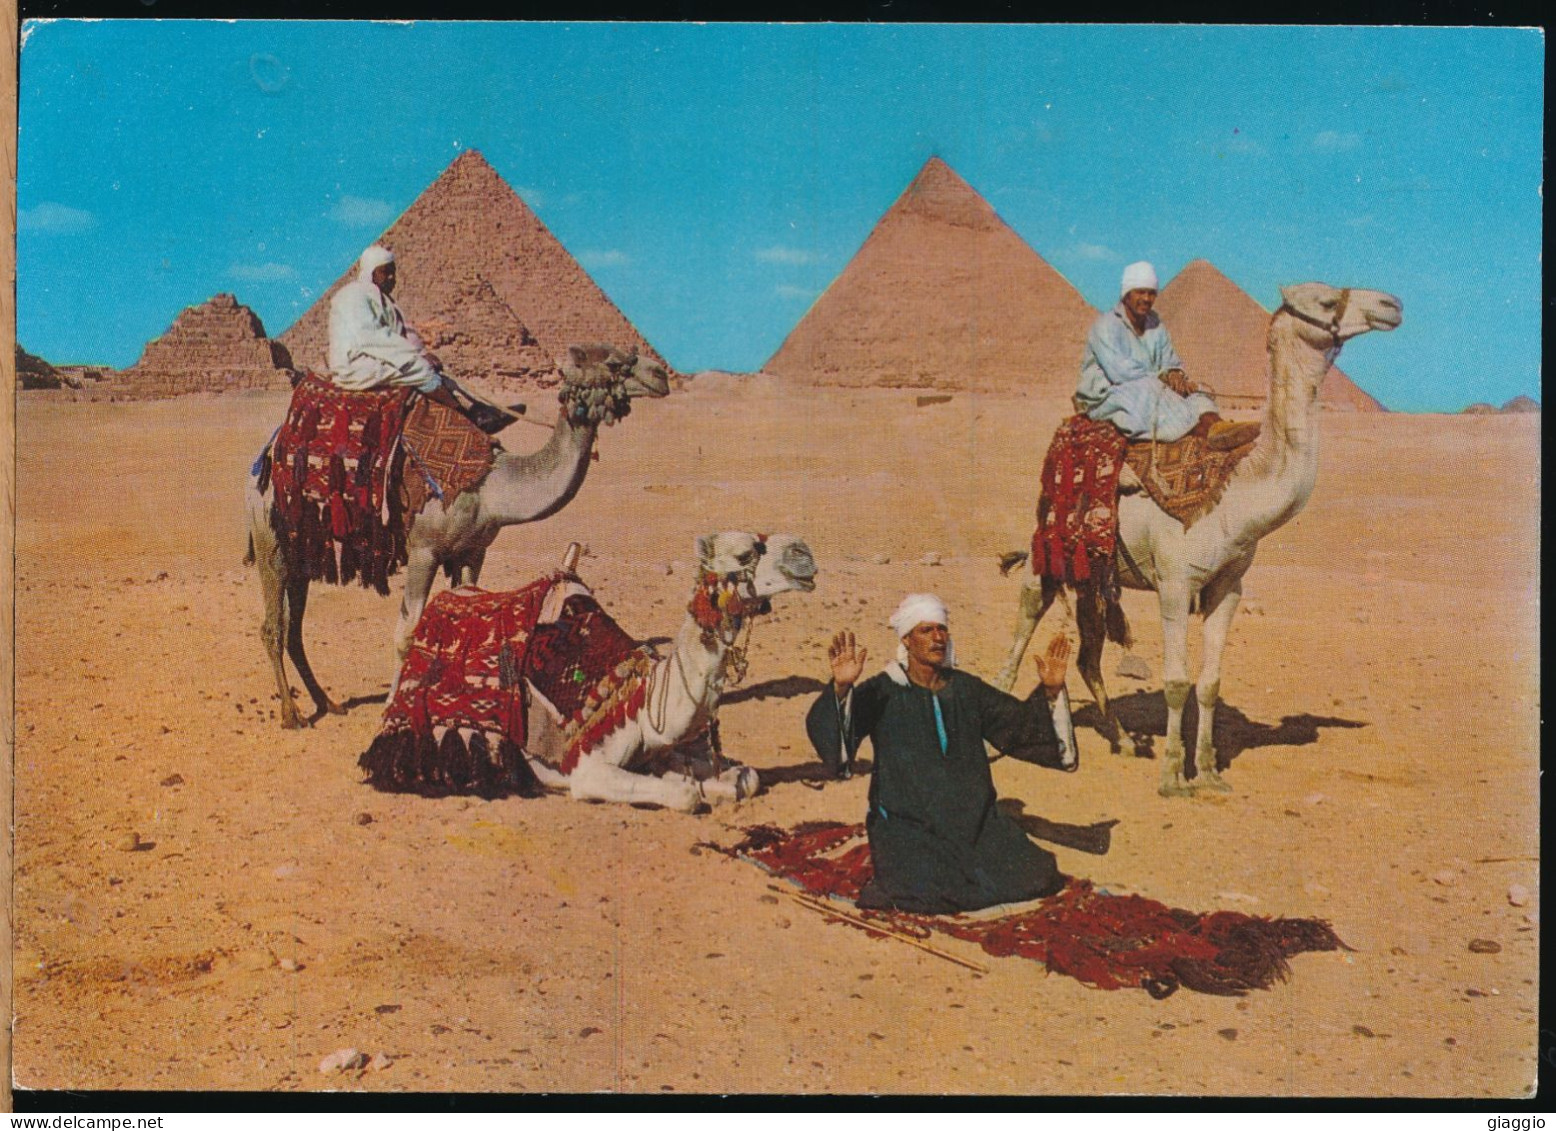 °°° 30862 - EGYPT - GIZA - ARAB CAMELRIDERS IN FRONT OF THE PYRAMIDS °°° - Gizeh